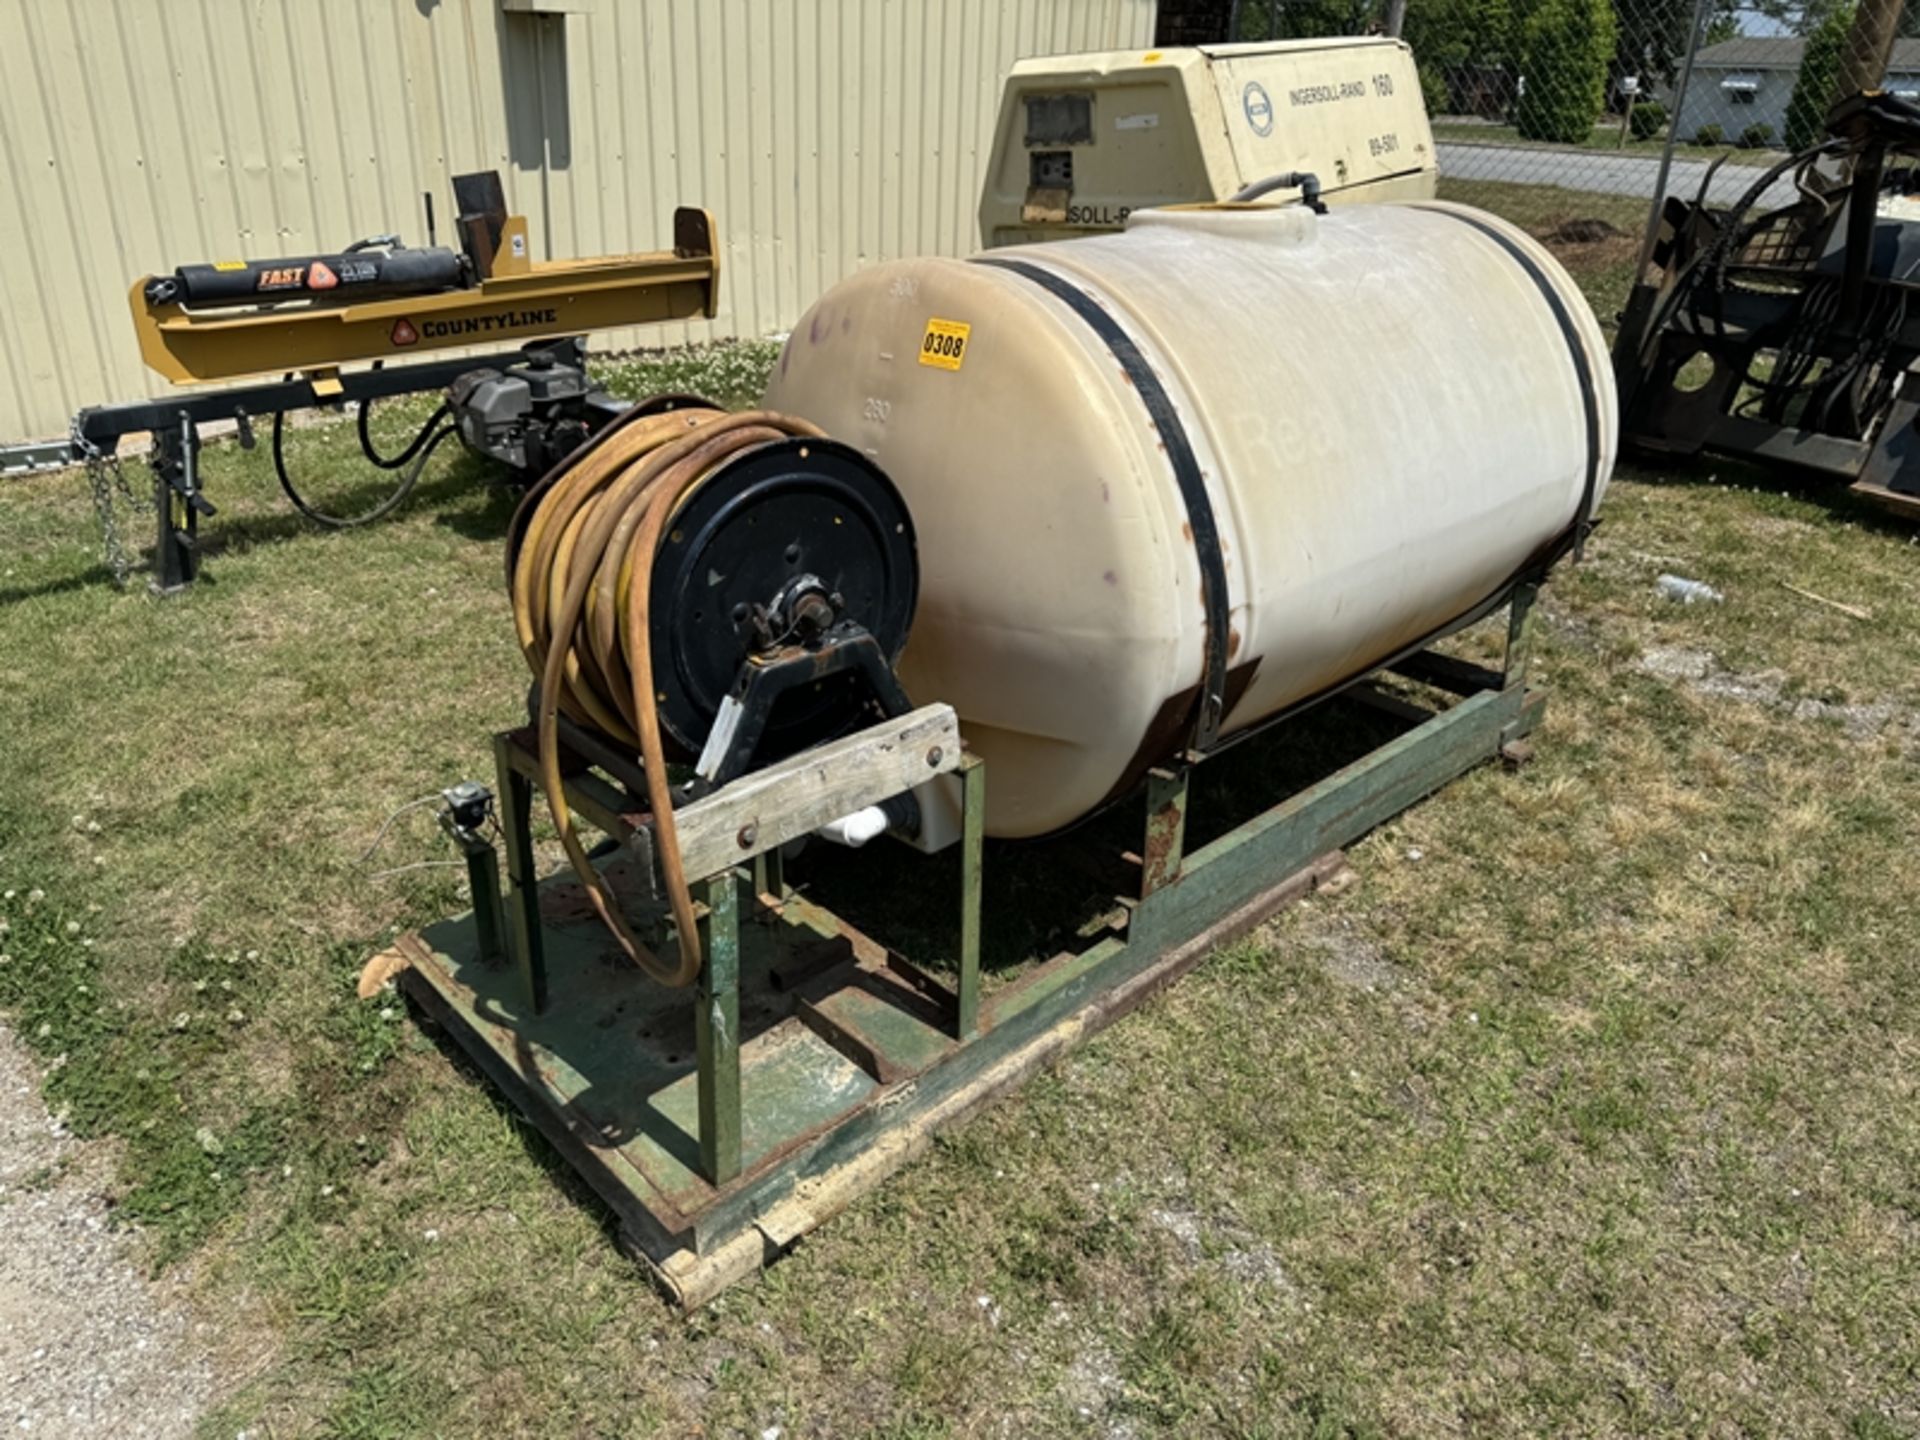 300 gallon tank with hhose and reel